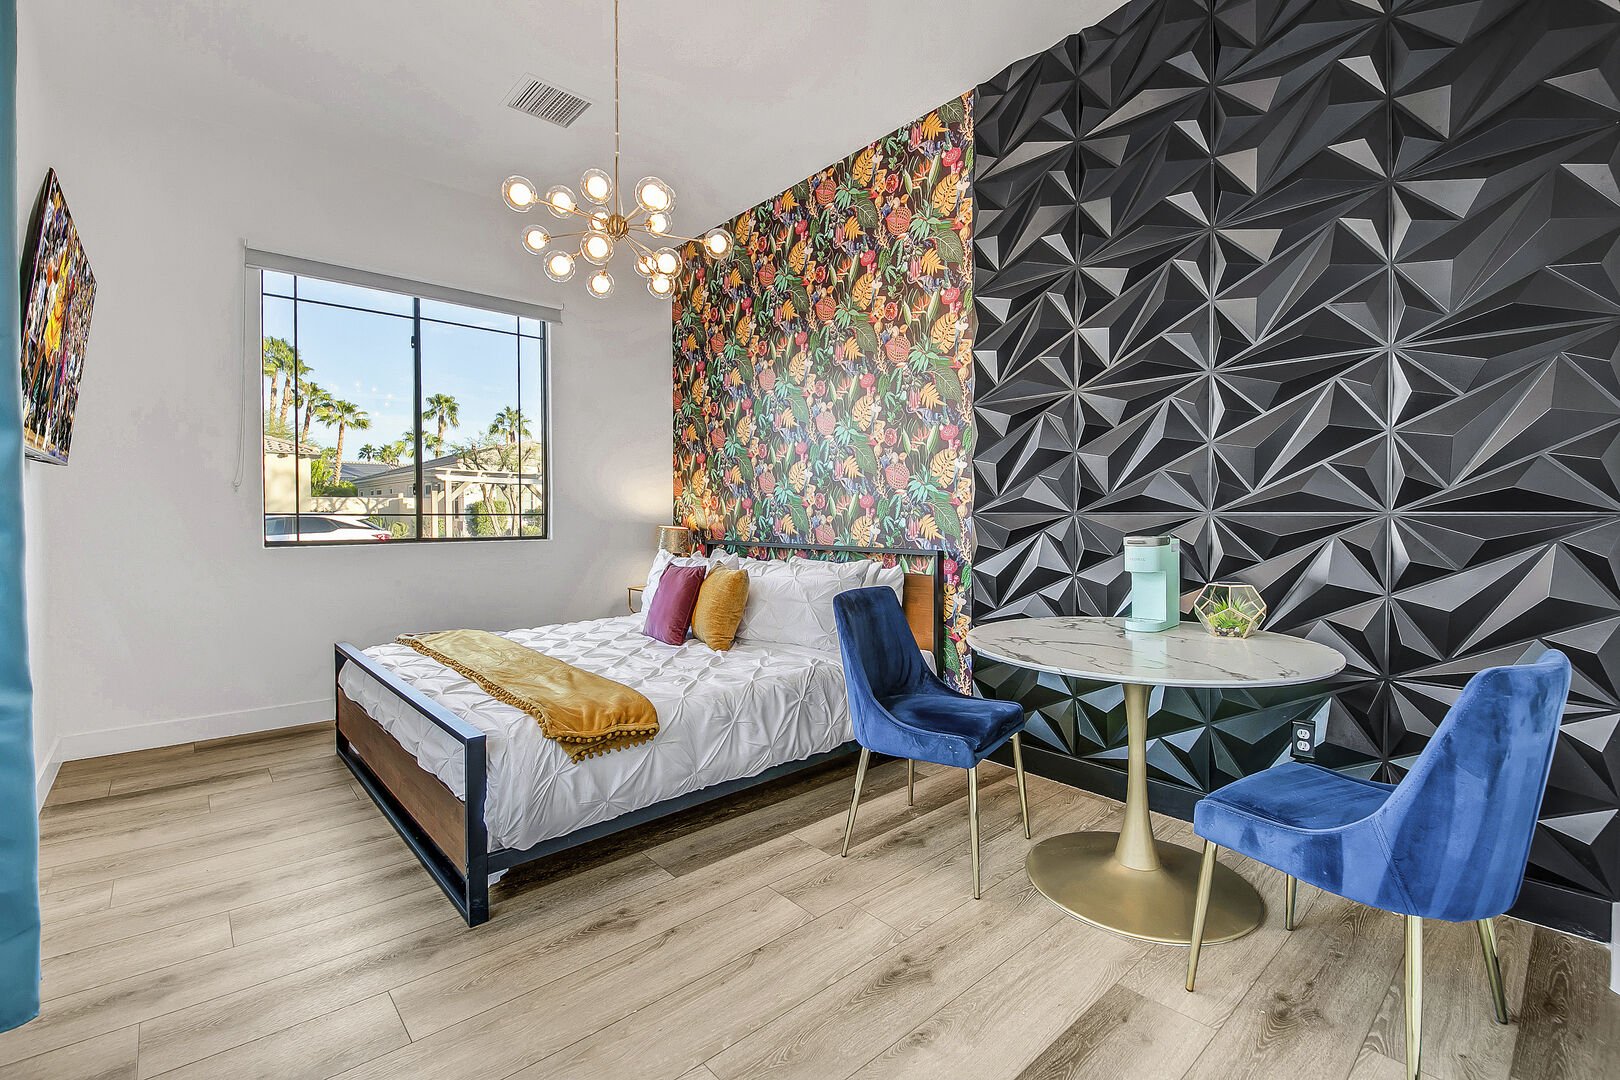 Casita Suite 3 features a King-sized Bed, 58-inch HiSense with Roku Smart television and a reach-in closet with access to the front courtyard.